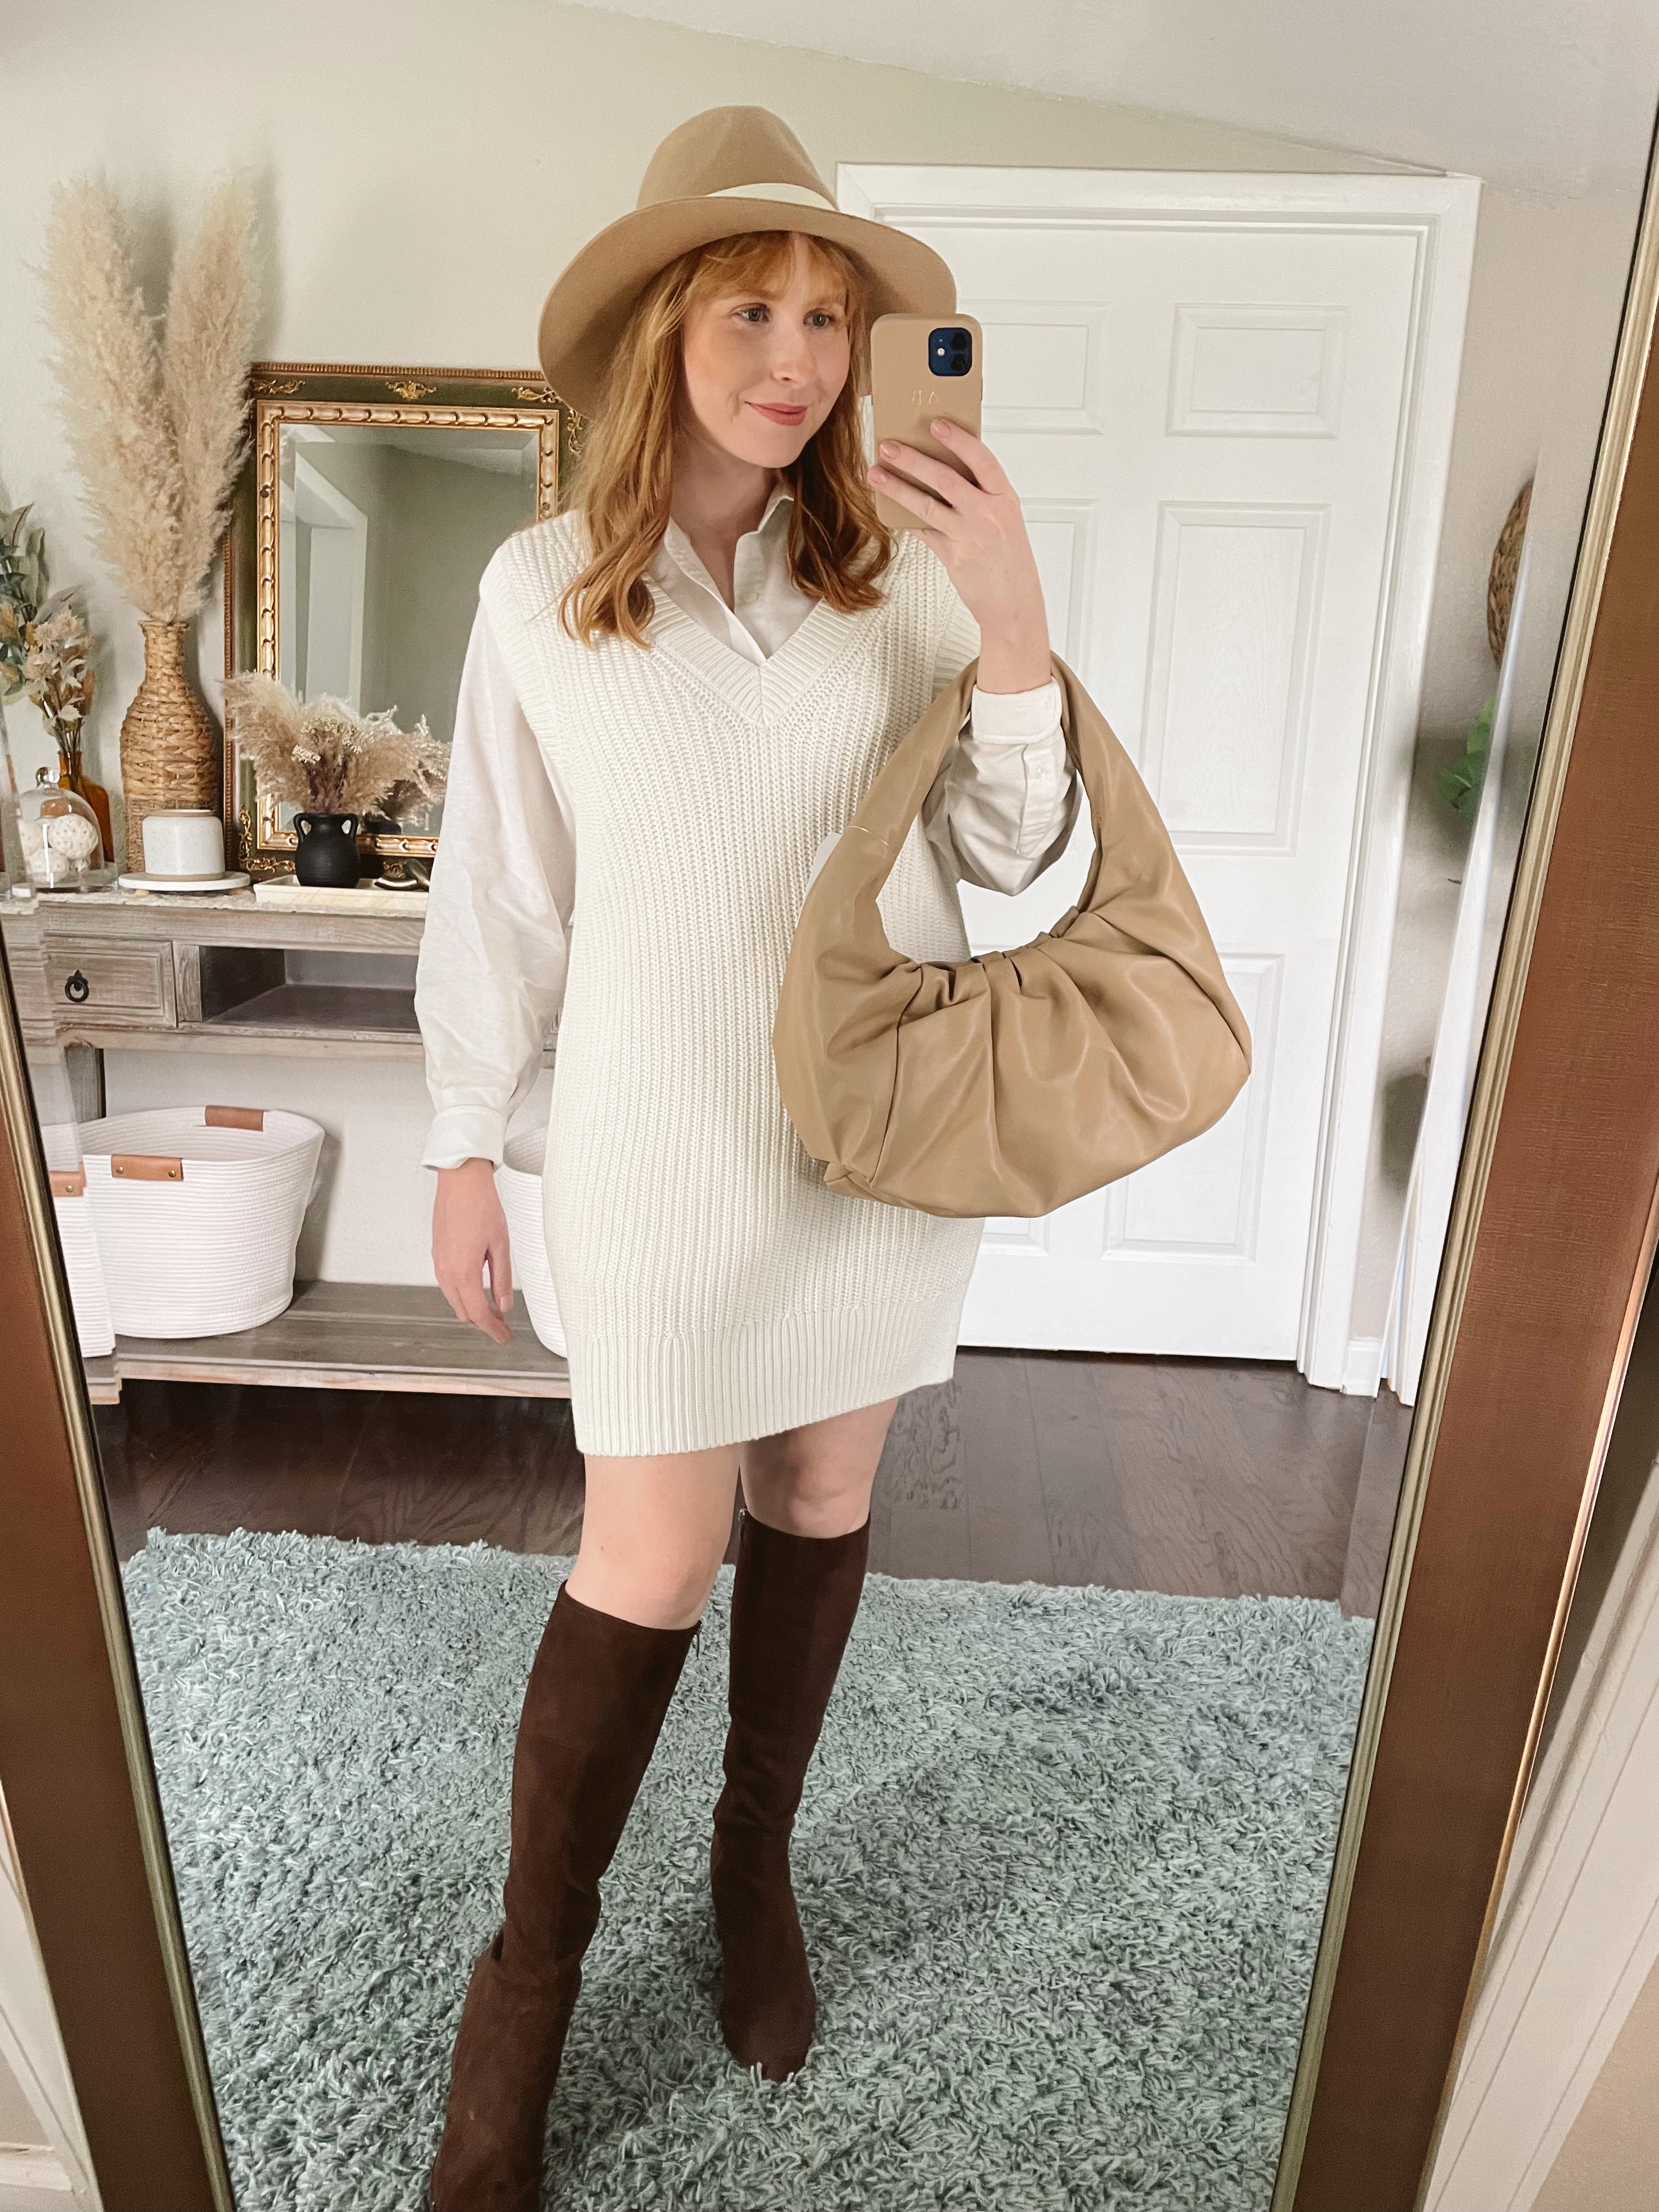 Abercrombie & Fitch Women’s Sweater Vest Mini Dress | Affordable by Amanda | How to Style a Sweater Vest